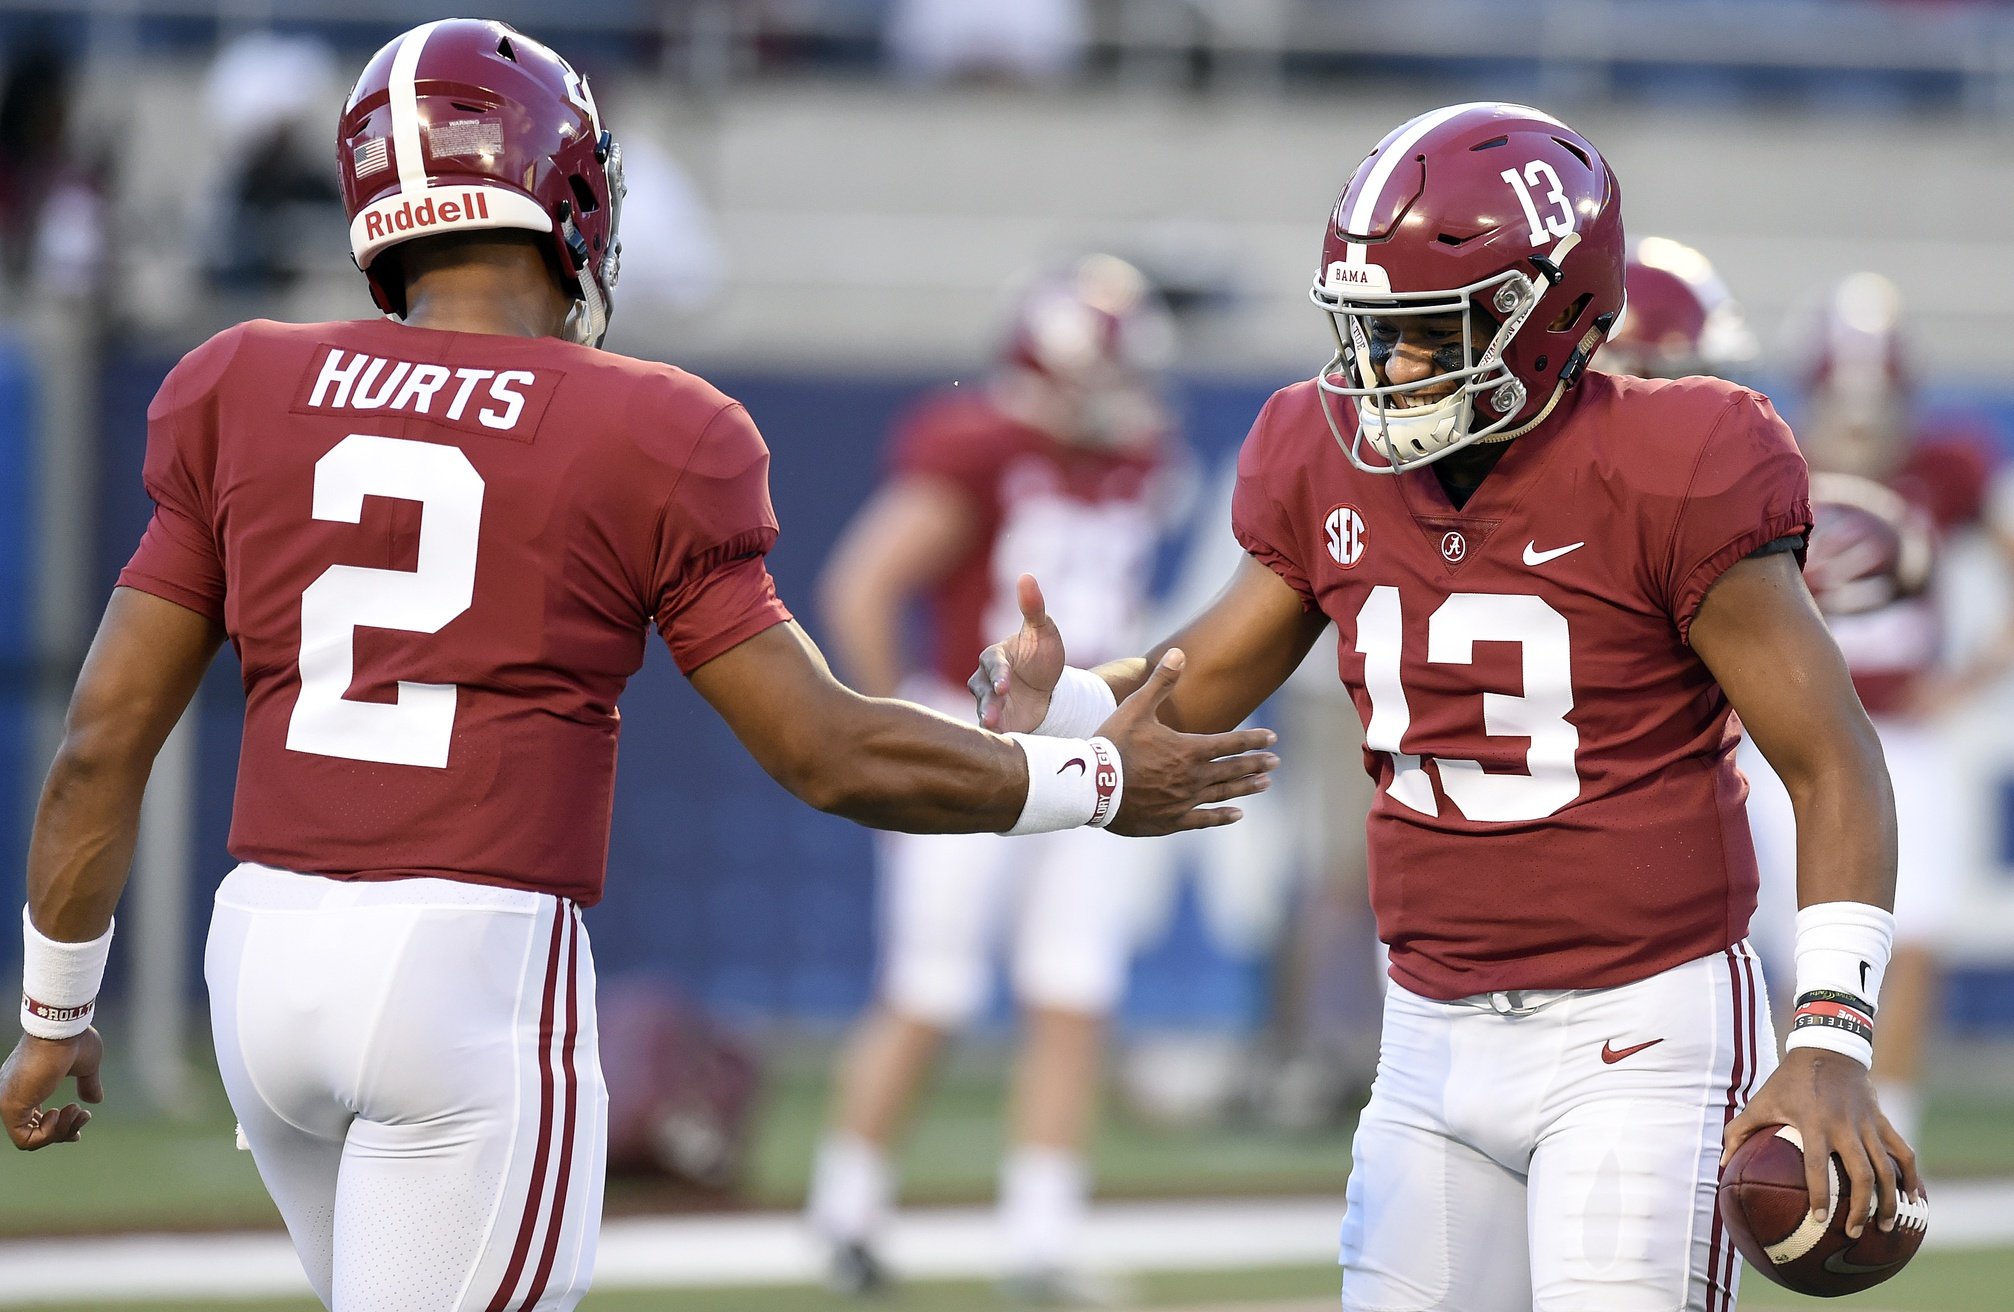 Here's what Jalen Hurts' Oklahoma teammates said about former